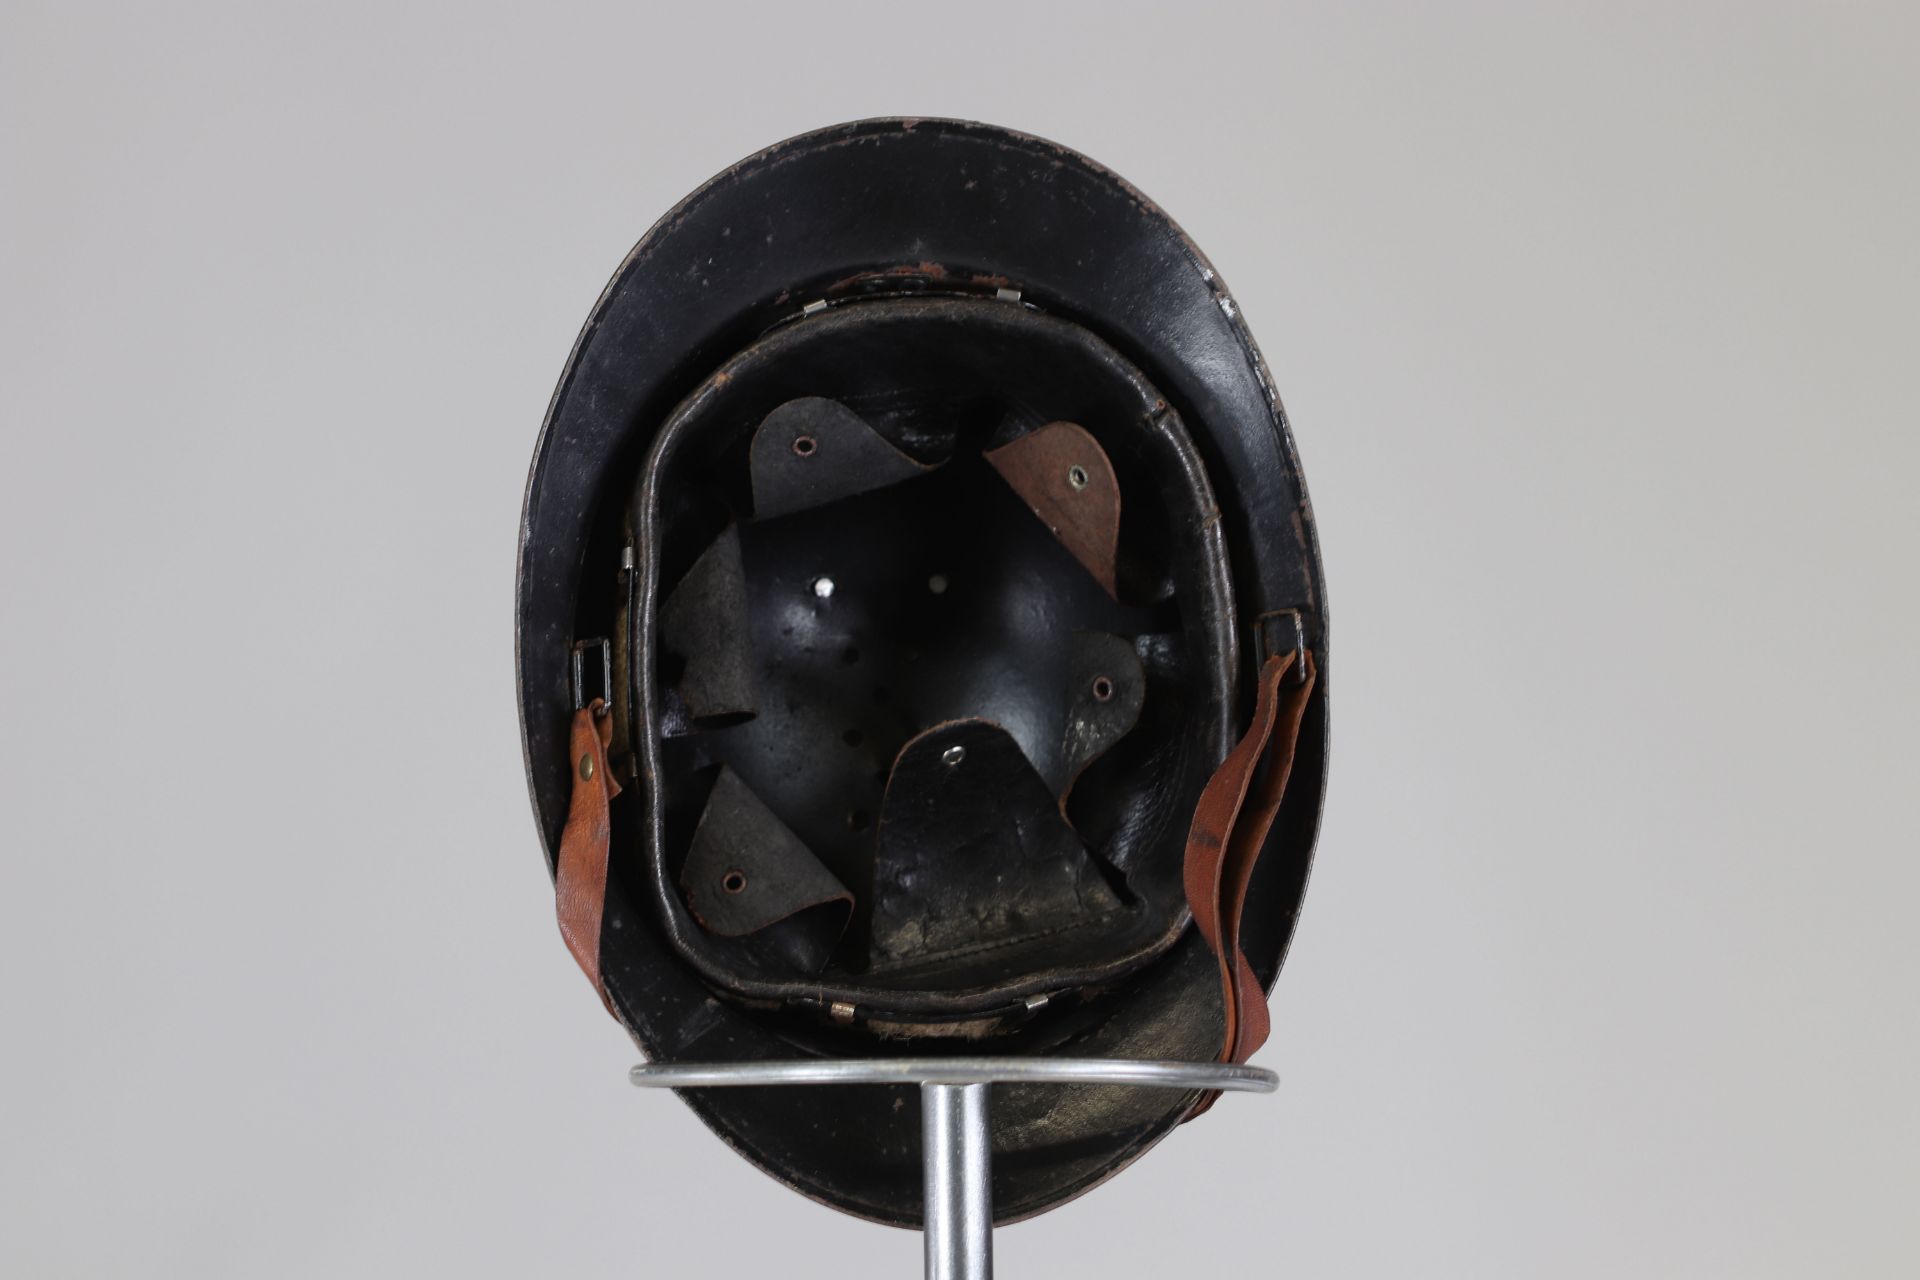 French WWII passive defense helmet - Image 5 of 5